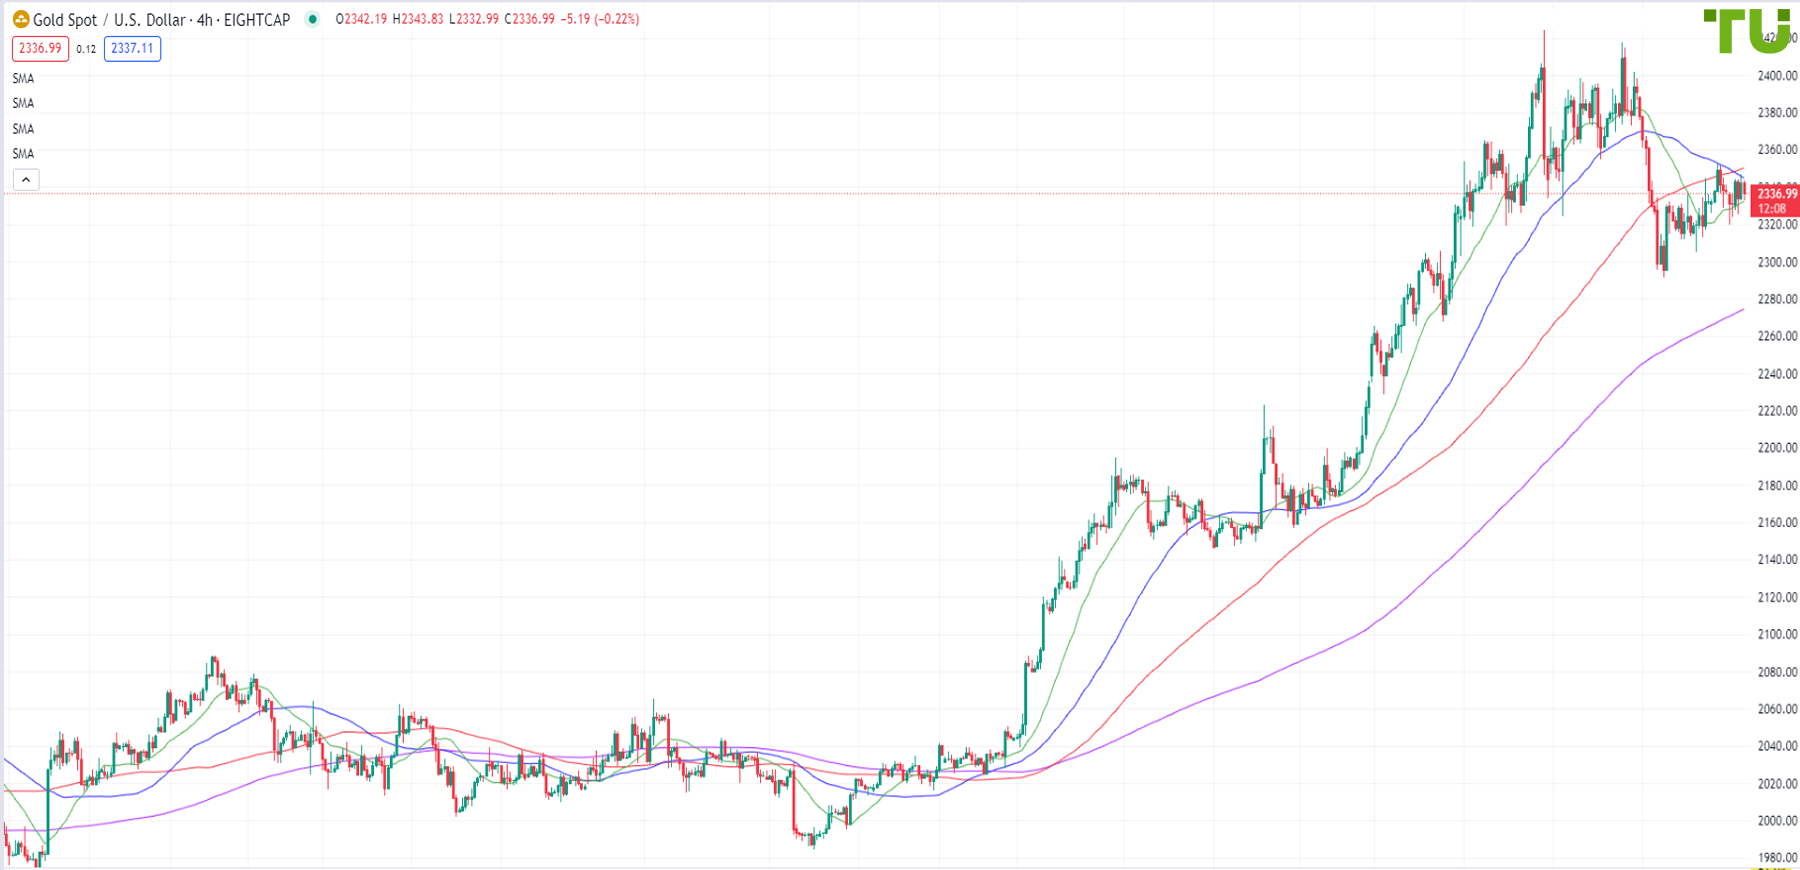 XAU/USD continues consolidation within a range